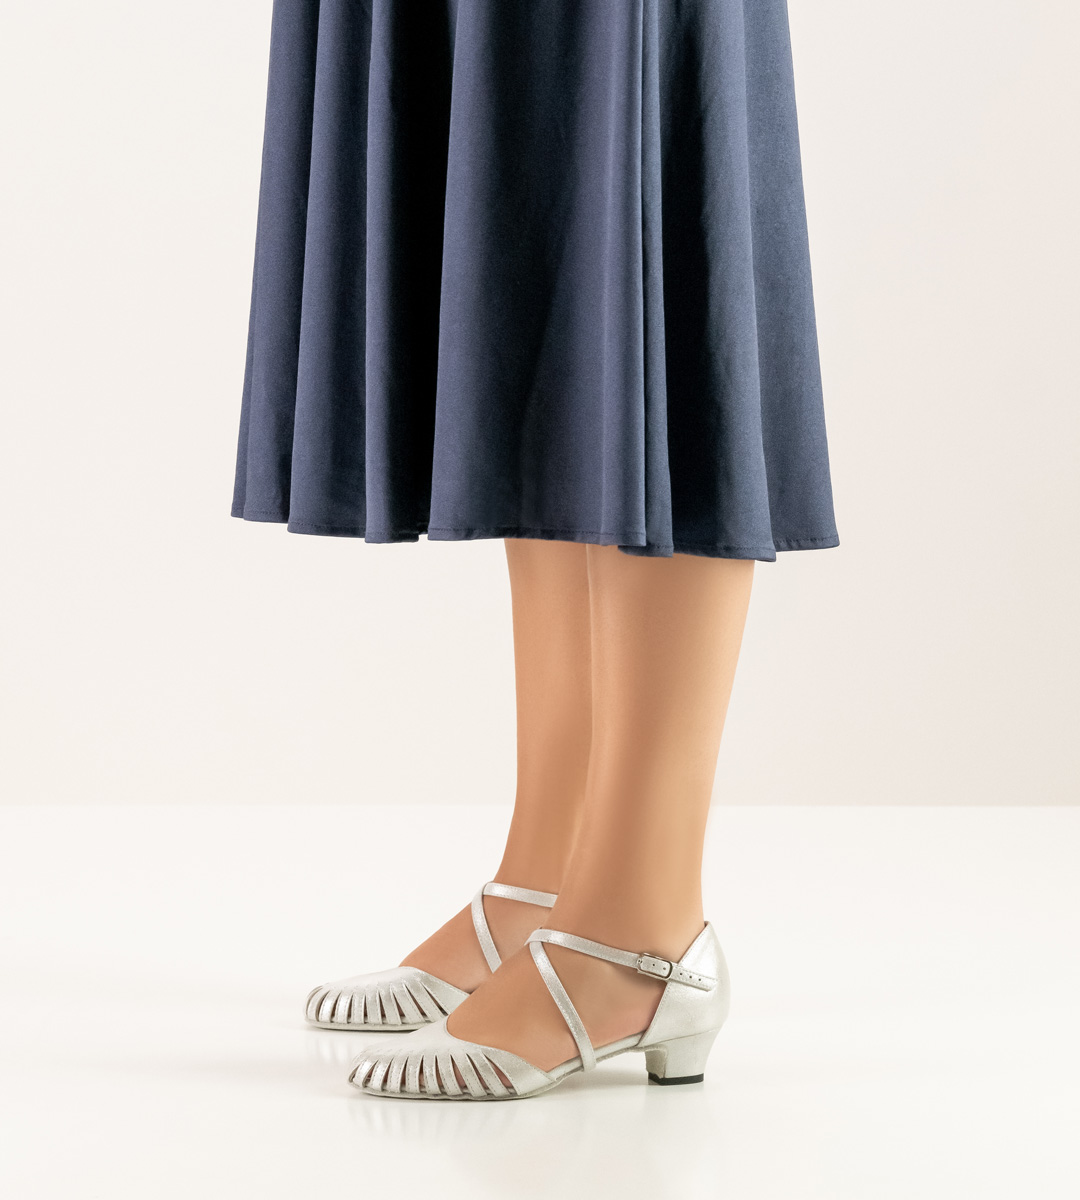 Women's dance shoe by Werner Kern in silver combined with blue skirt